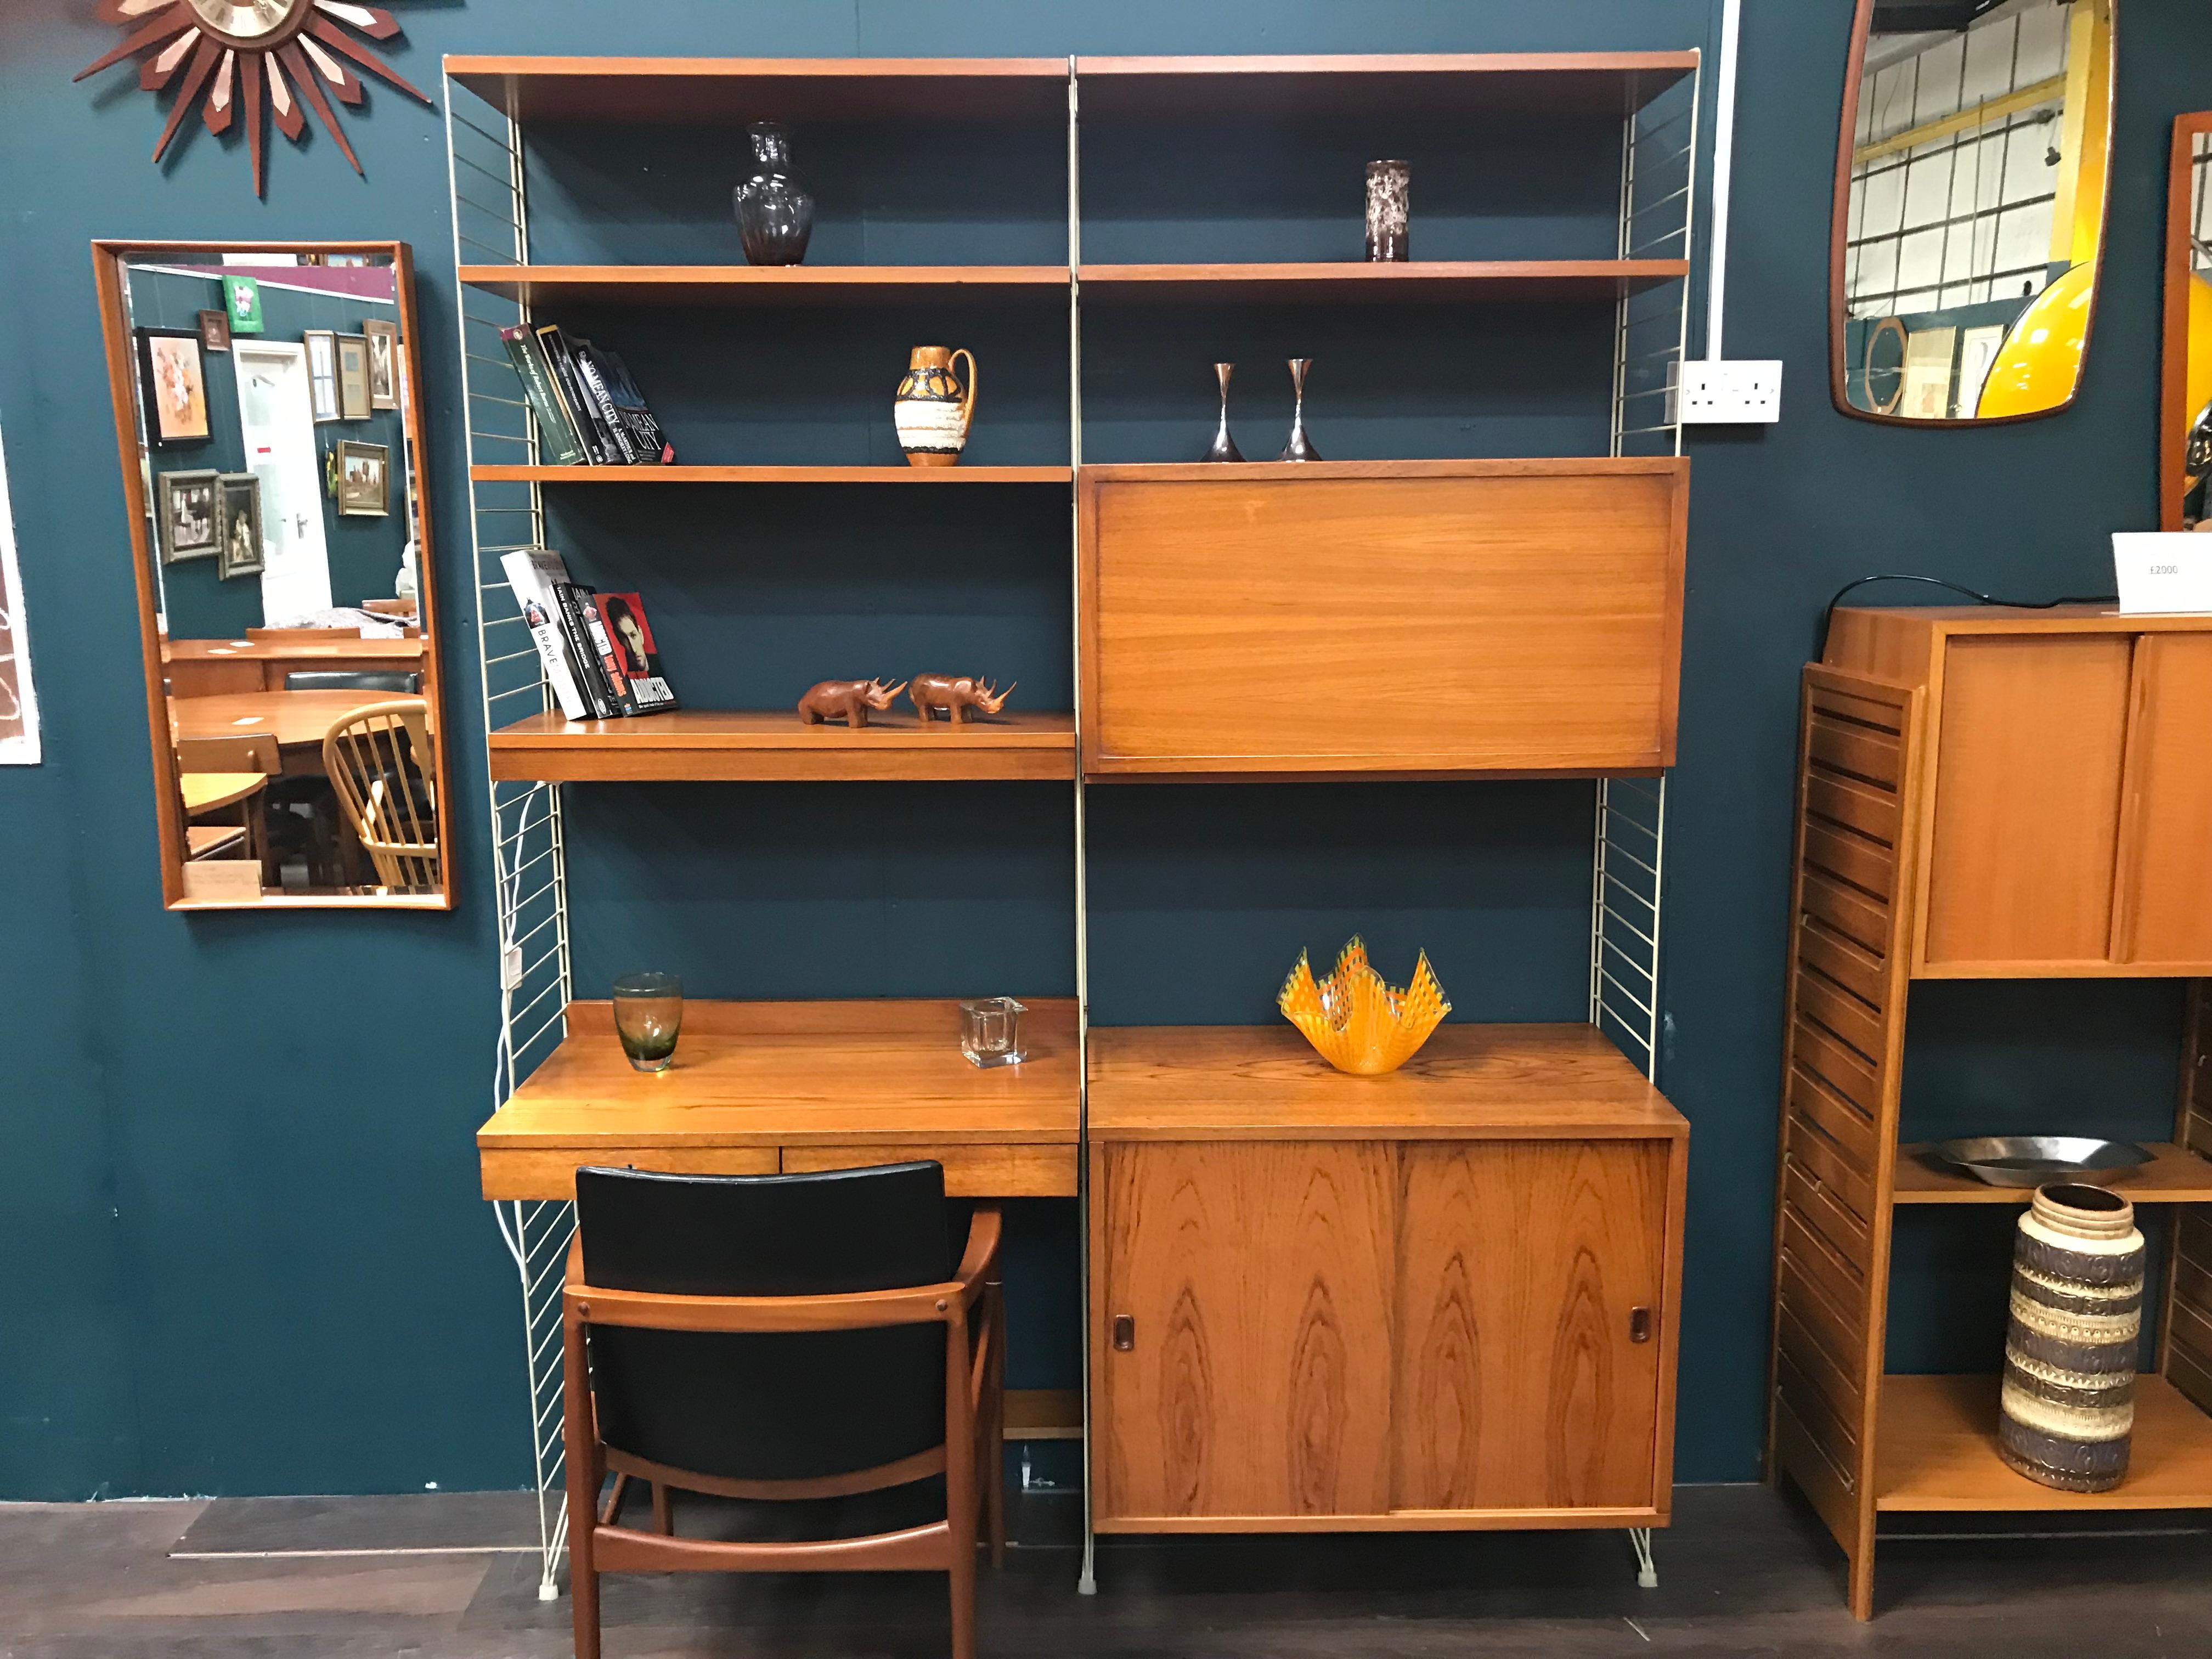 Stylish and functional, this is a Classic midcentury String shelving system designed by the Swedish designer Nils Nisse Strinning. The upright ladders allow the teak cabinets and shelves to be positioned wherever required. This is a very versatile